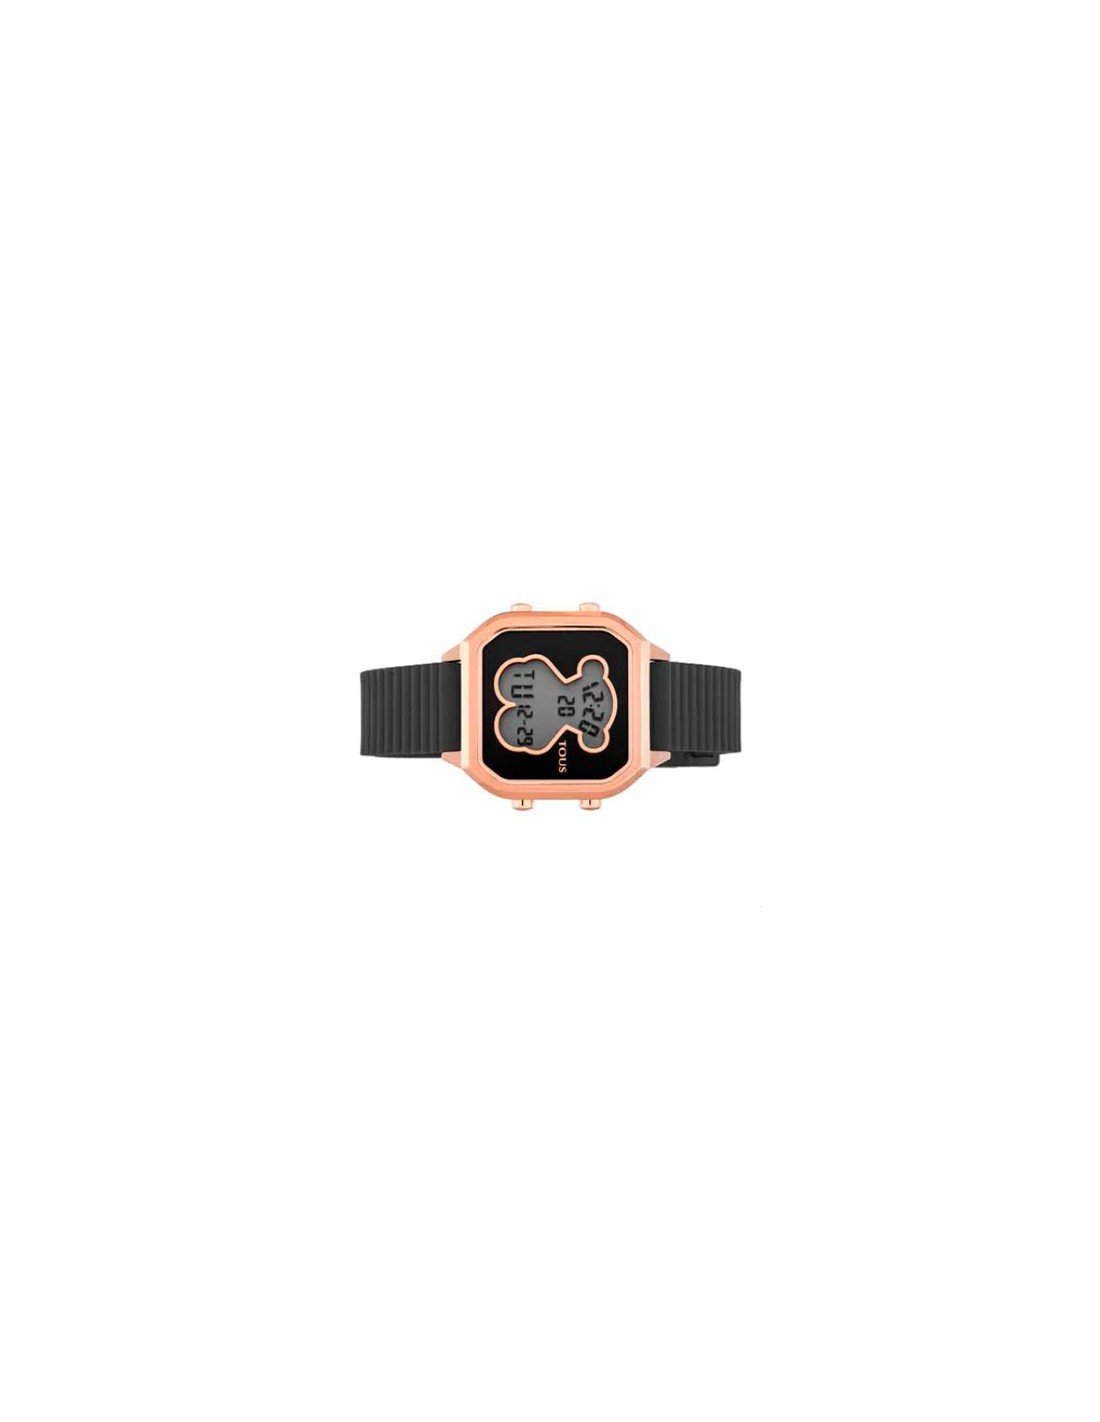 Tous D-Bear Teen Watch In Pink Ip Steel With Silicone Strap, latest offers  on Tous Moda jewels